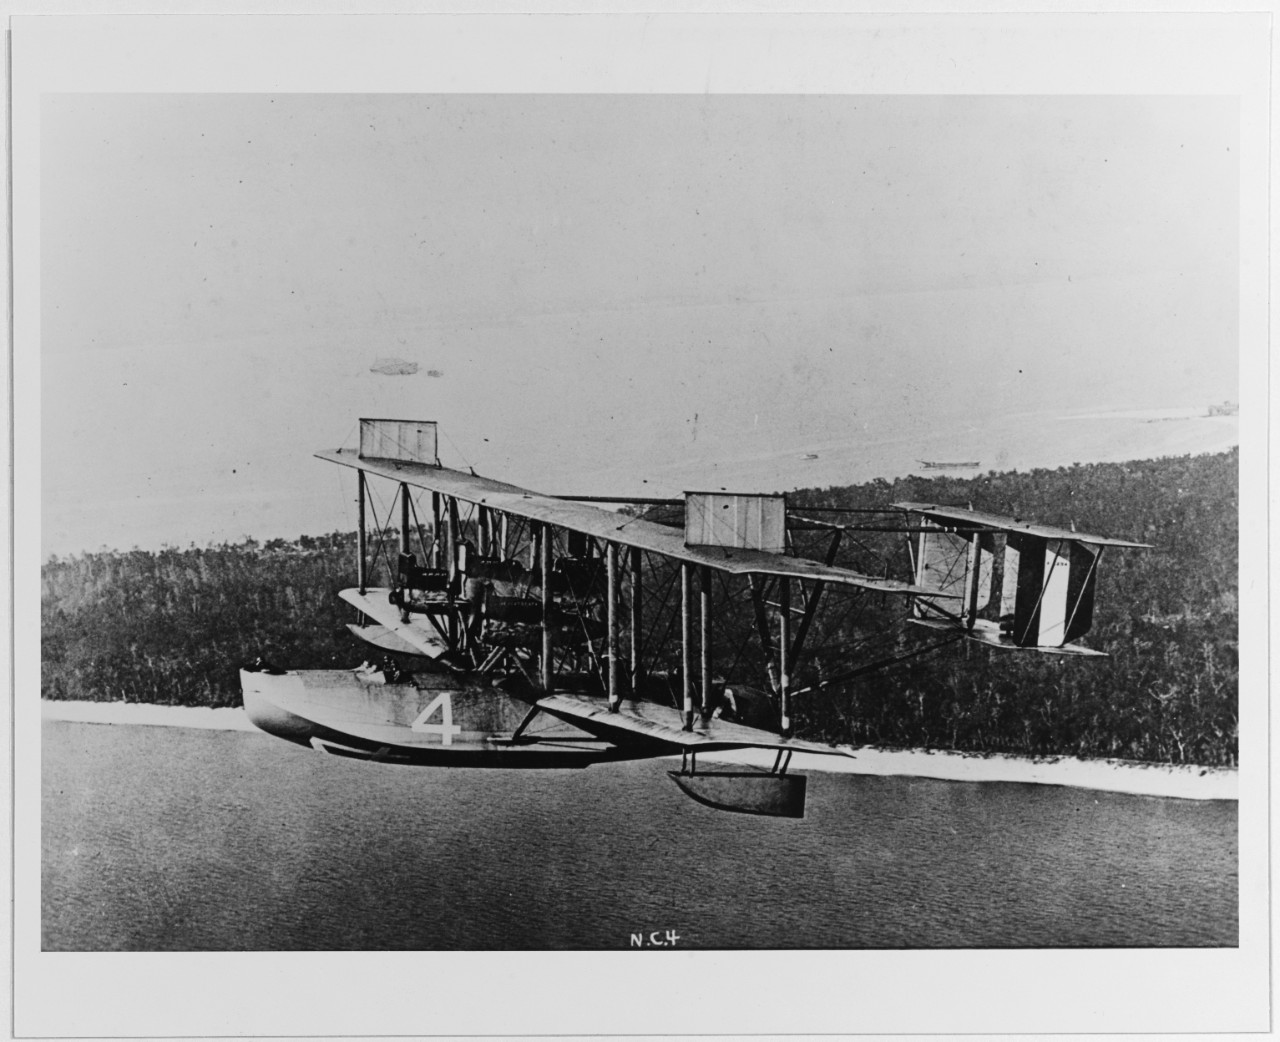 Navy/Curtiss NC-4 (flying boat)